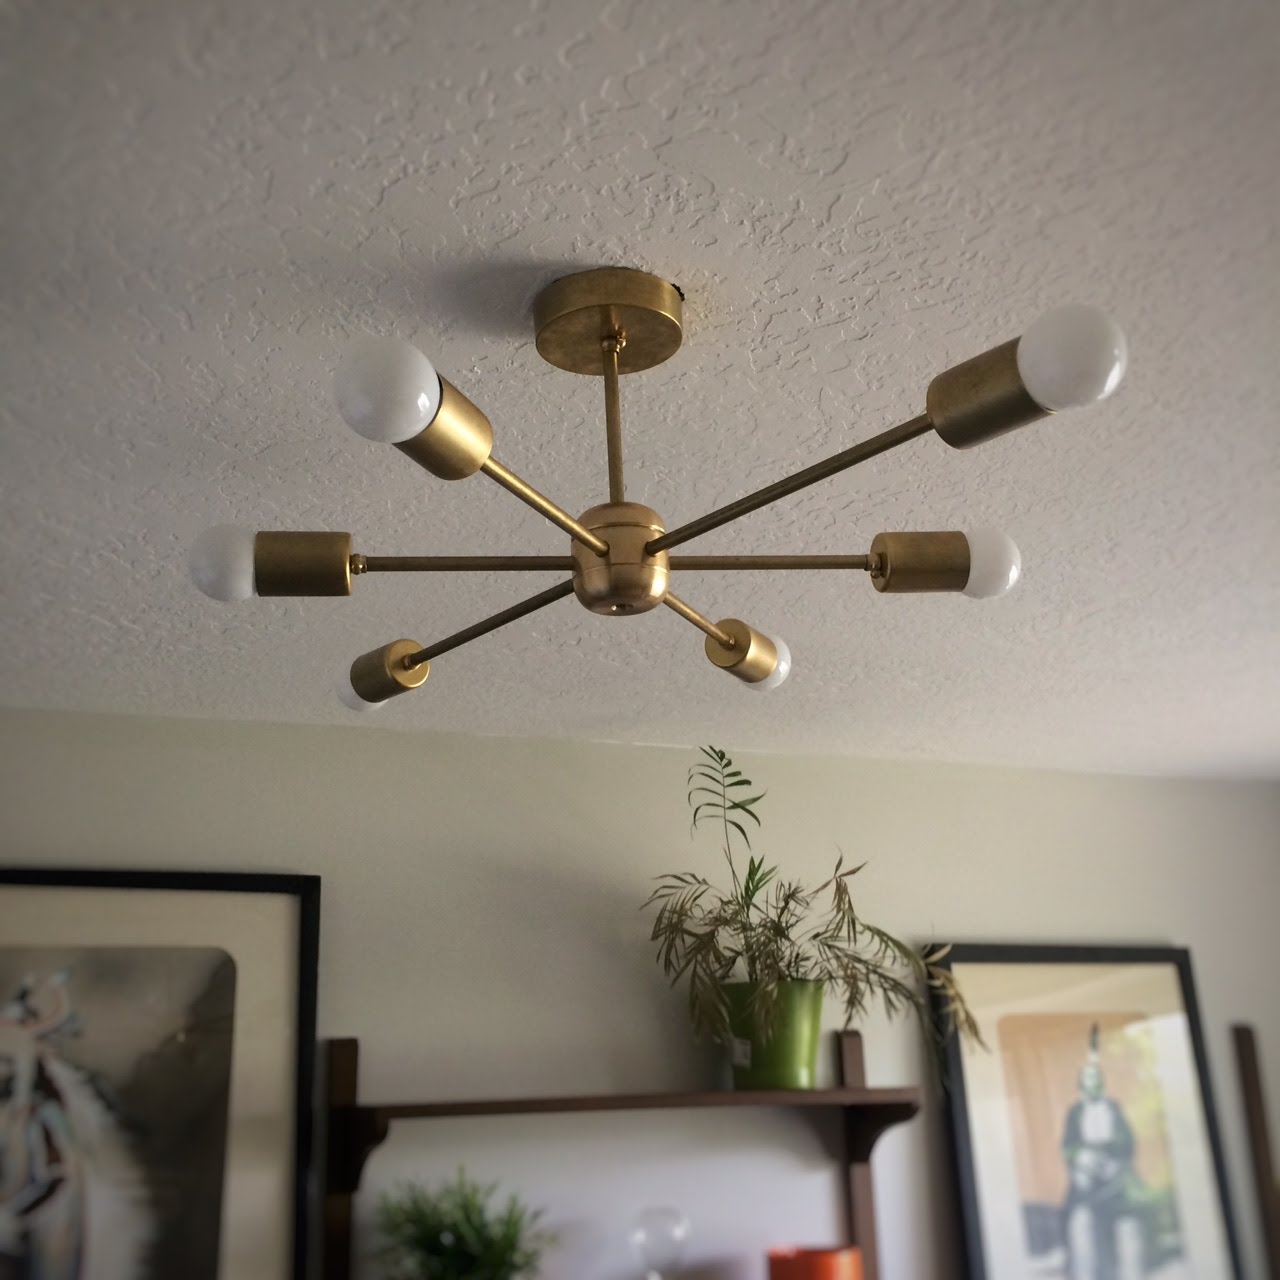 Latest Diy Ceiling Light for Small Space